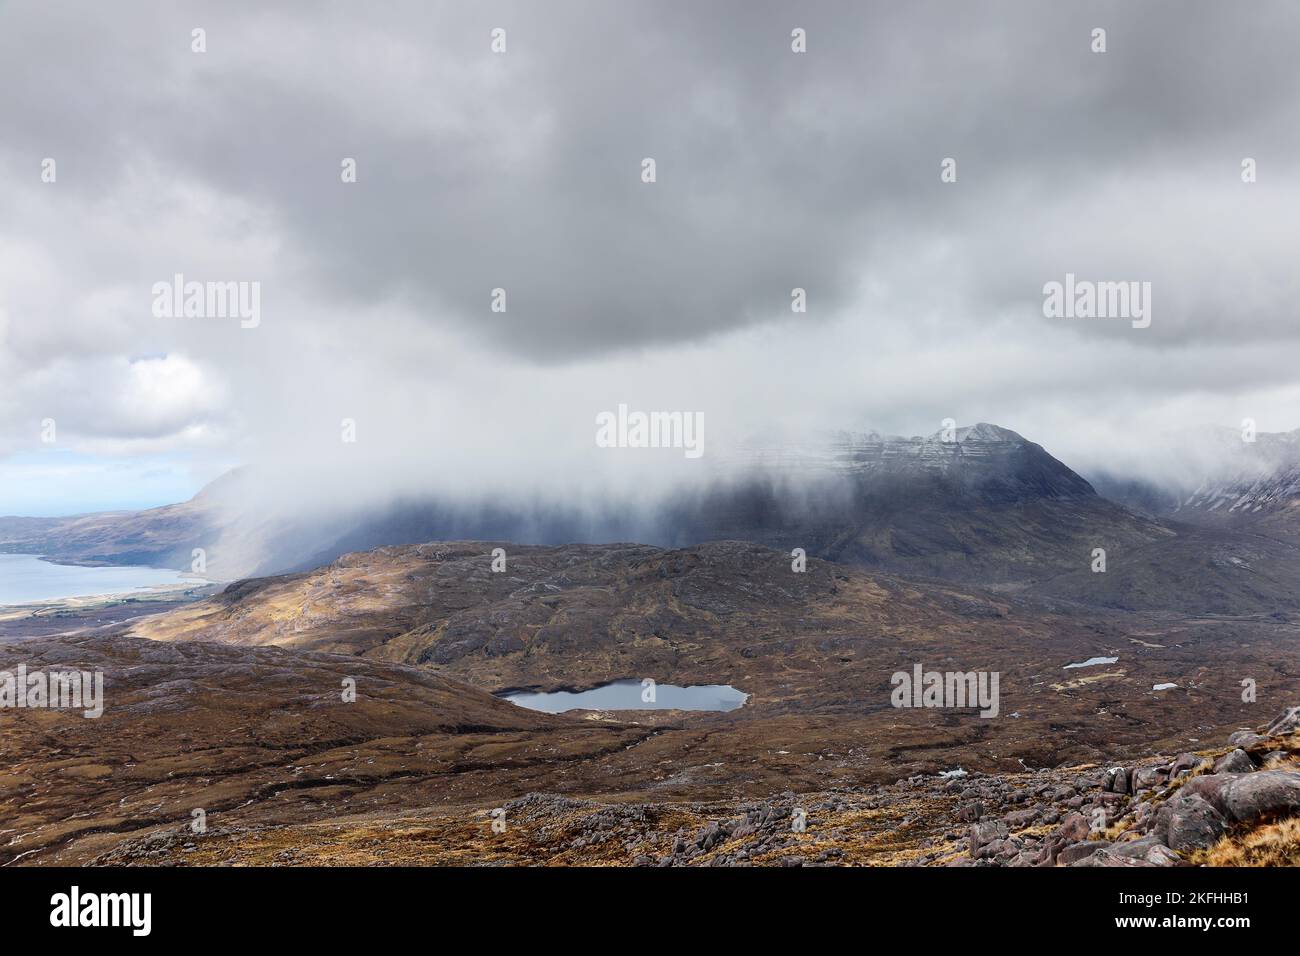 The Mountain of Liathach Viewed from the Lower Slopes of Beinn Liath Mhor as a Heavy Snow Shower Sweeps Past, Torridon, Highland, Scotland, UK Stock Photo